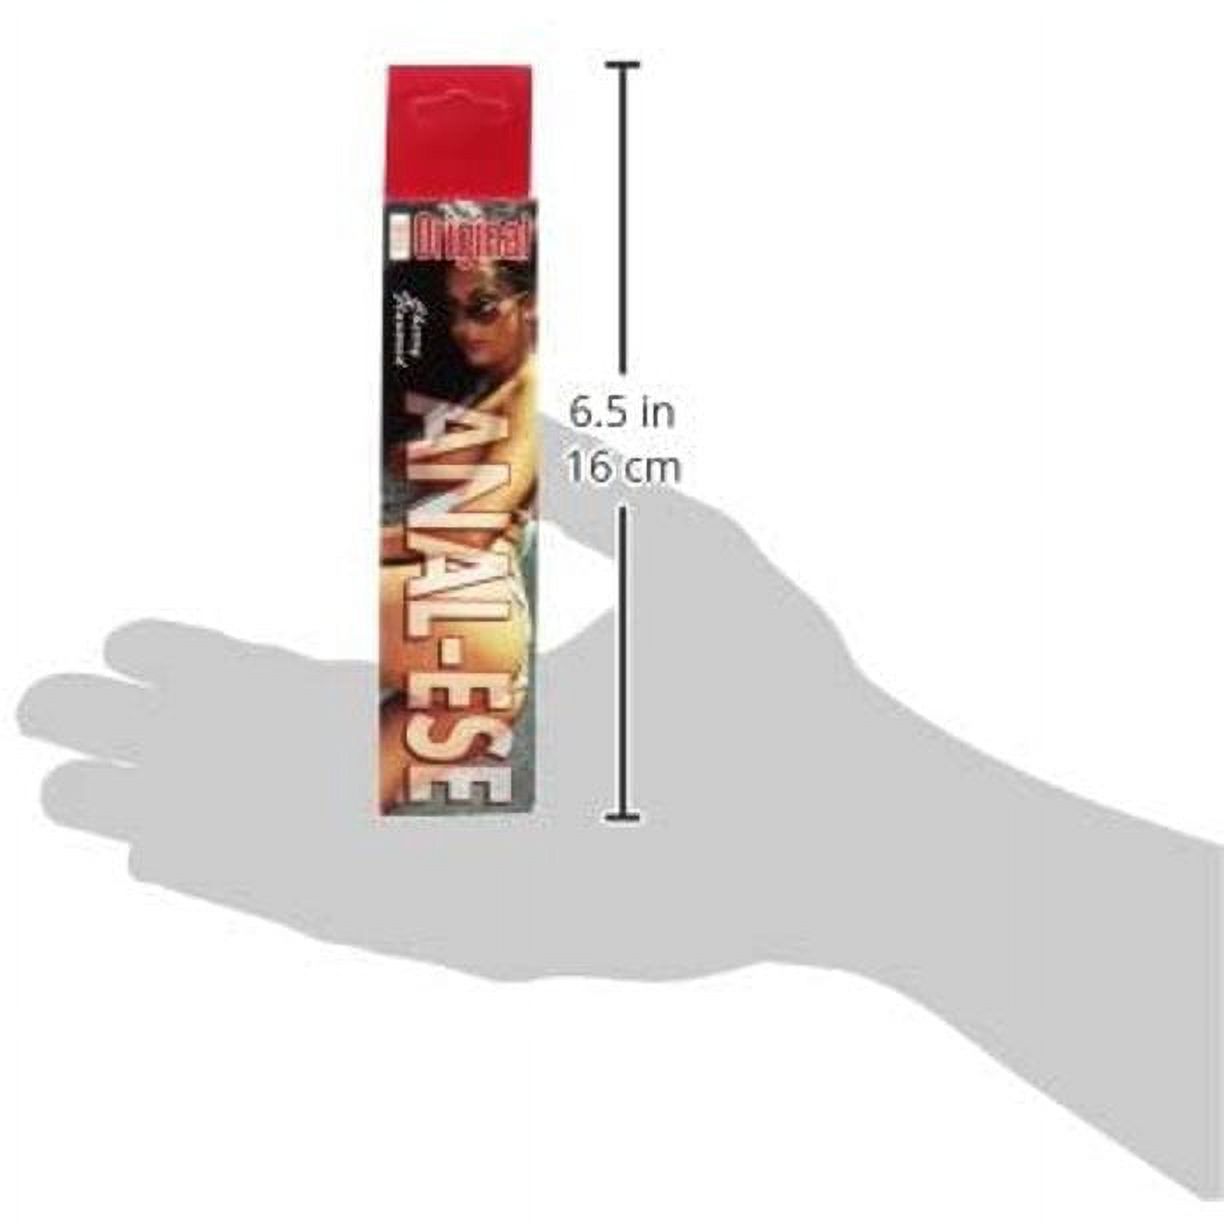 Anal-Ese - 1.5 oz. (Pack of 2) - image 2 of 3